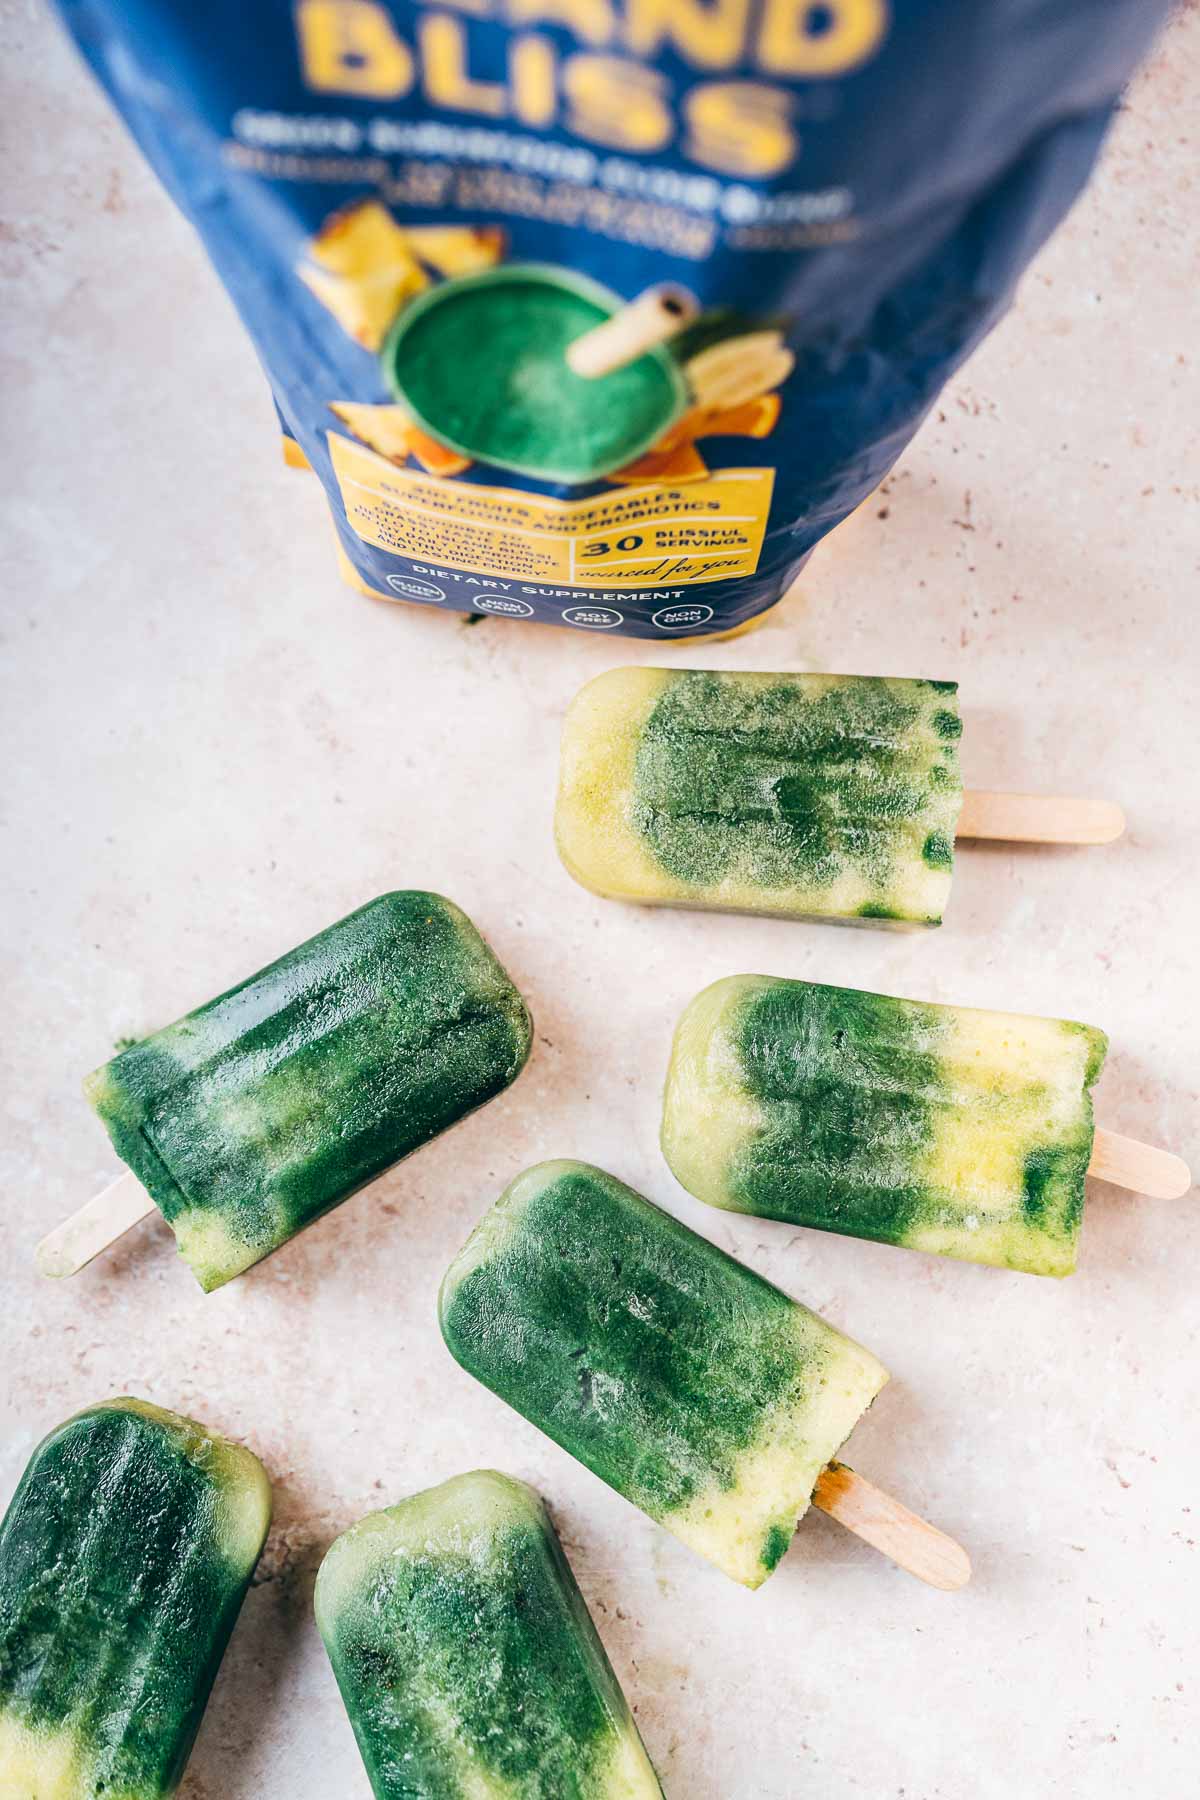 Green and yellow ice pops rest on a tan tabletop.